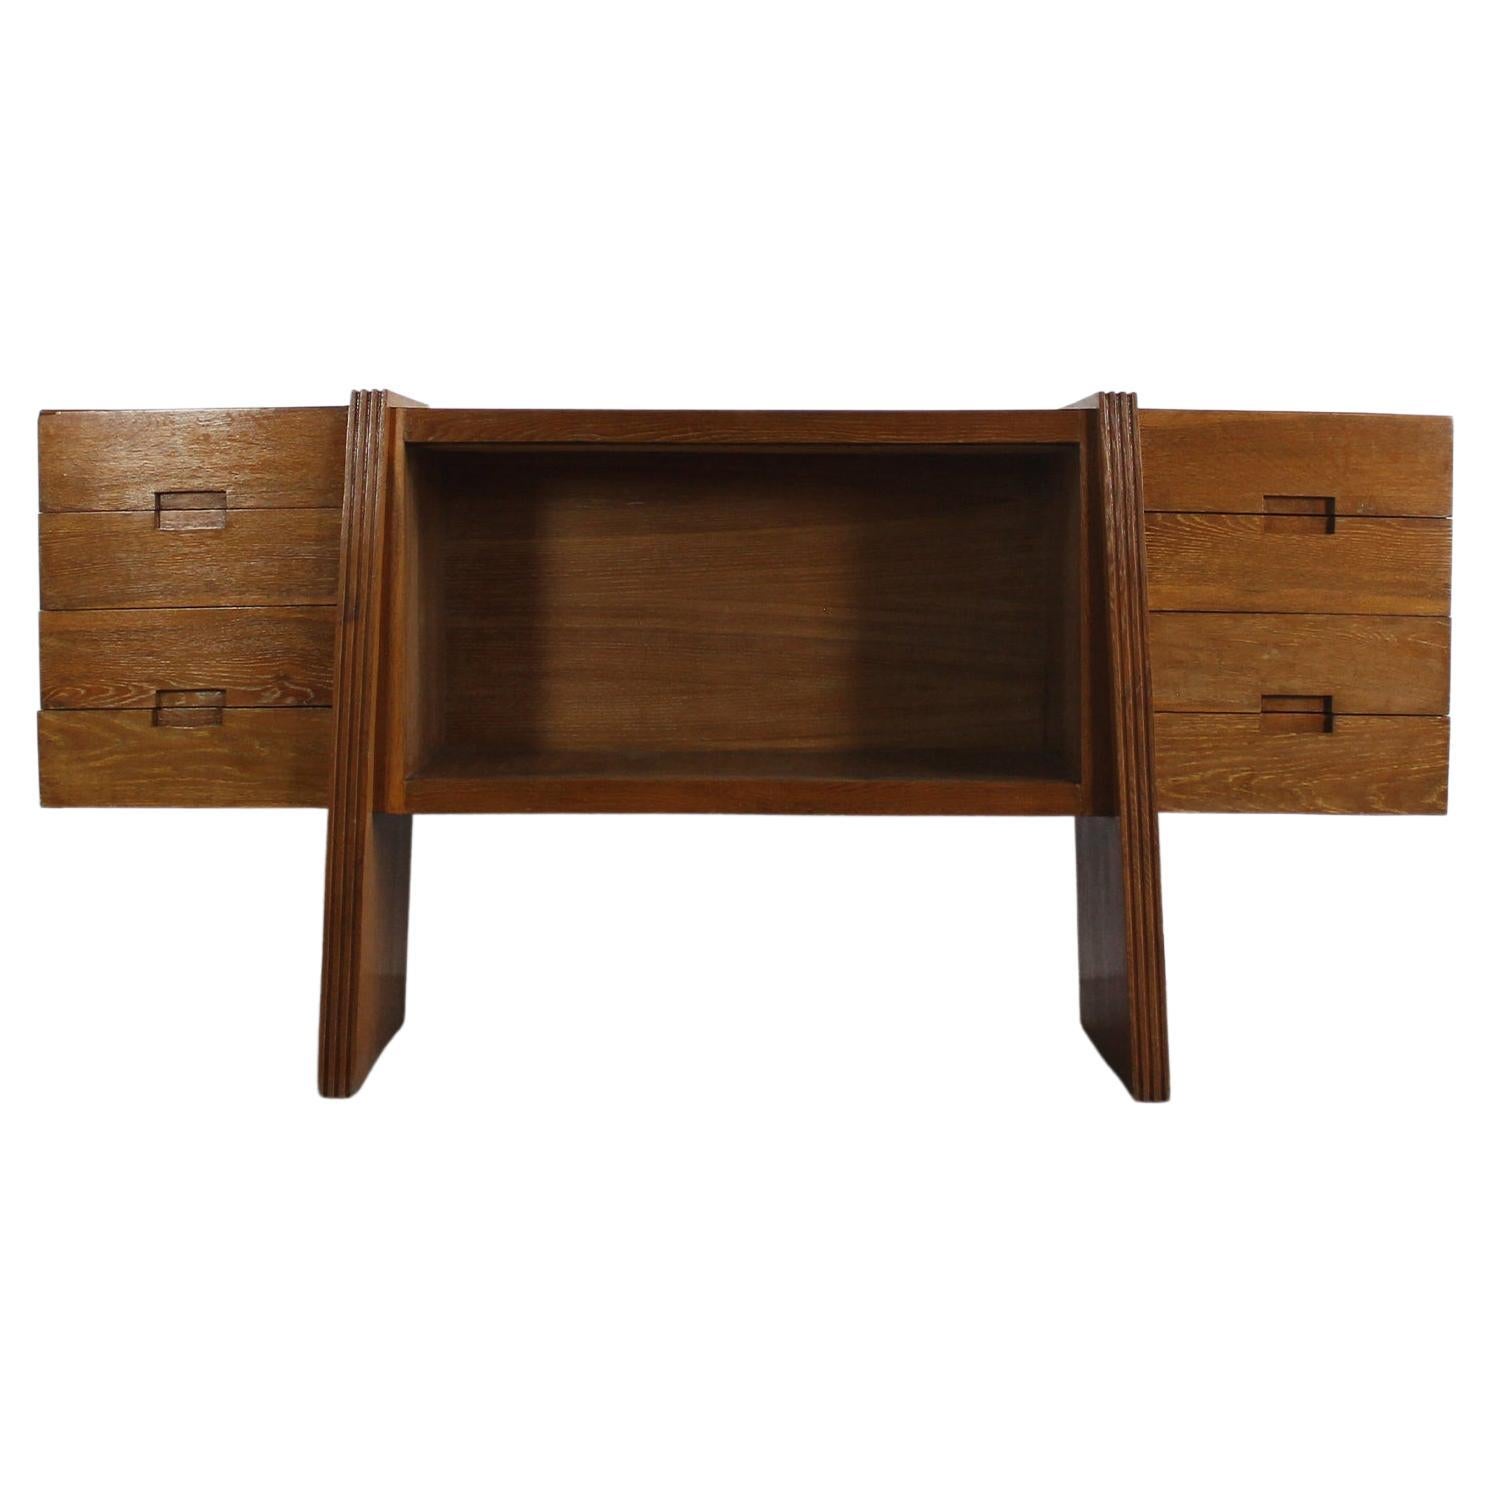 Pier Luigi Colli Large Sideboard in Wood with Drawers Italian Manufacturer 1930s For Sale